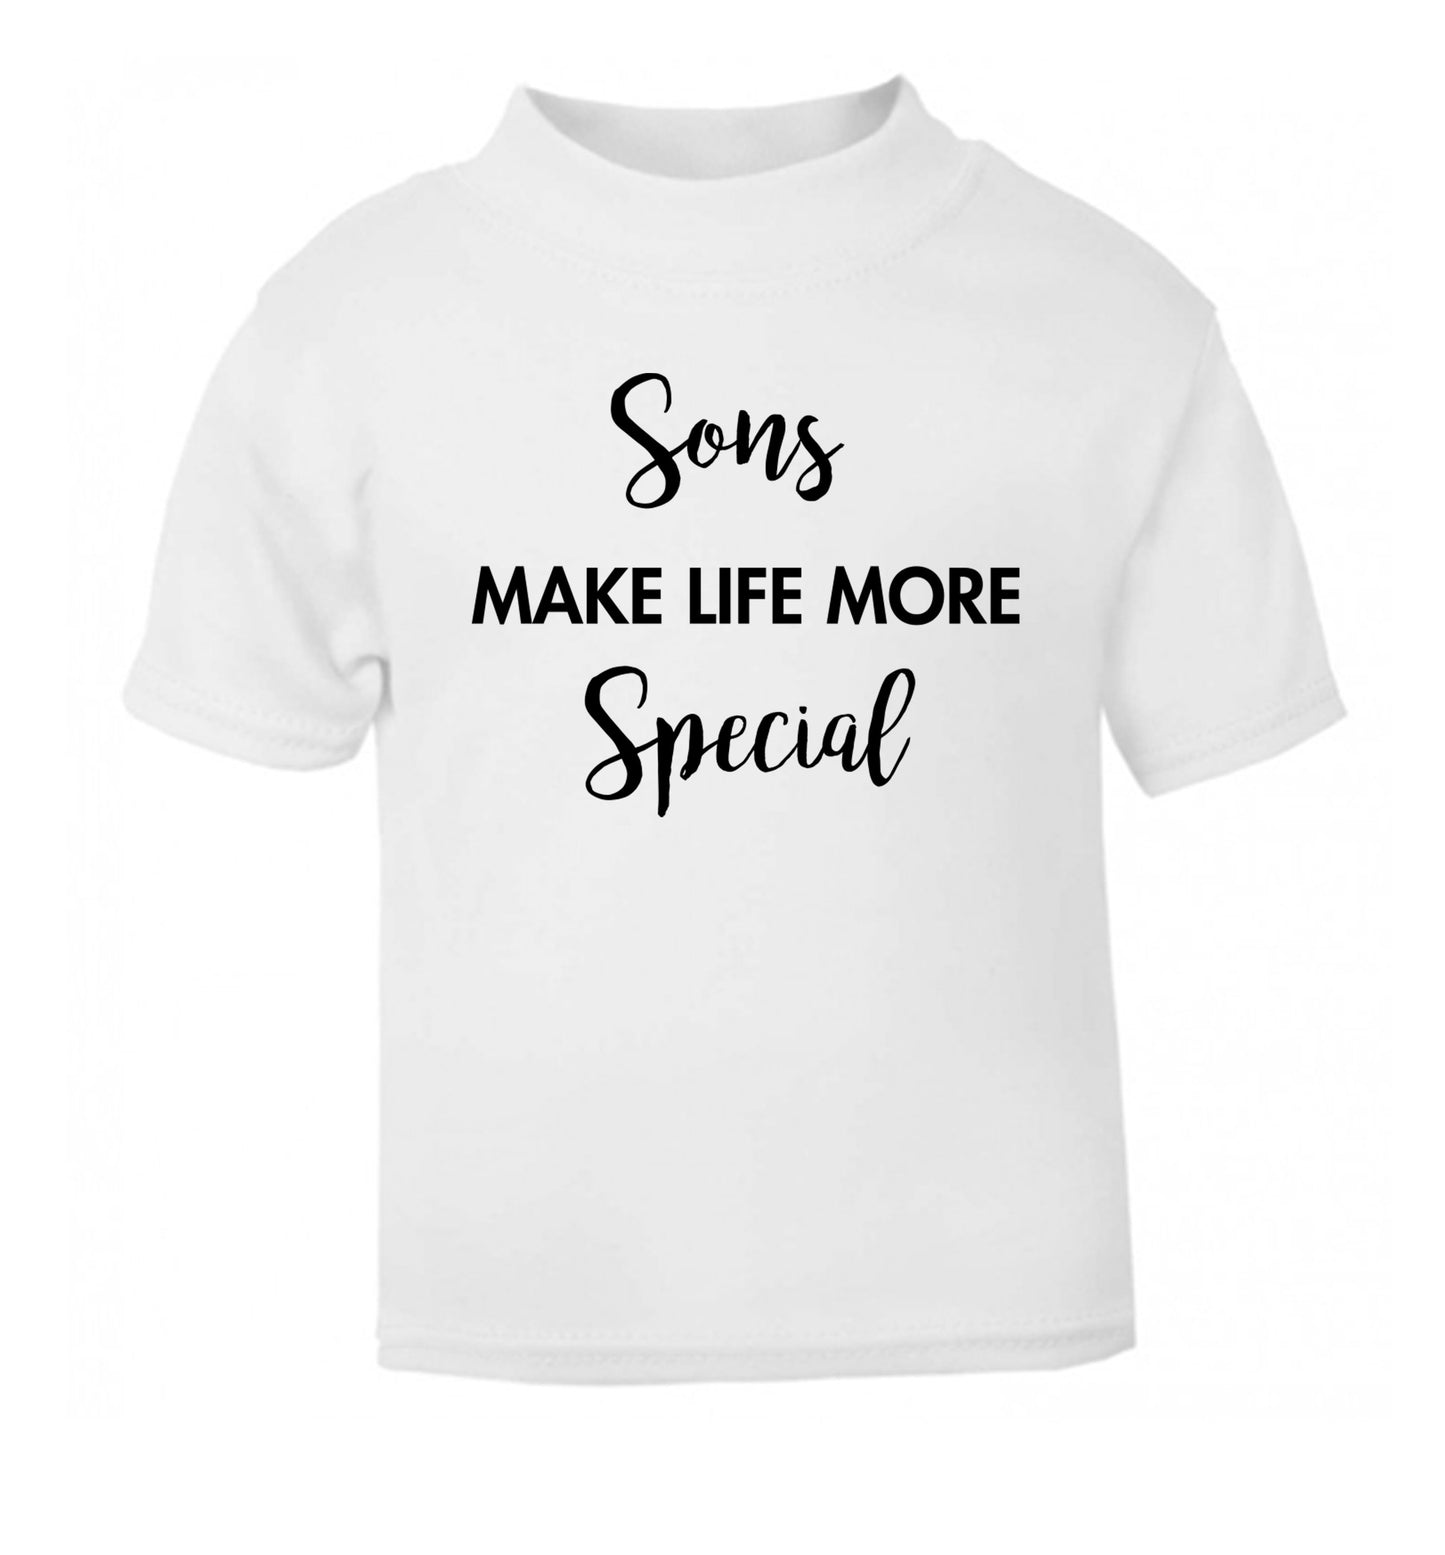 Sons make life more special white Baby Toddler Tshirt 2 Years